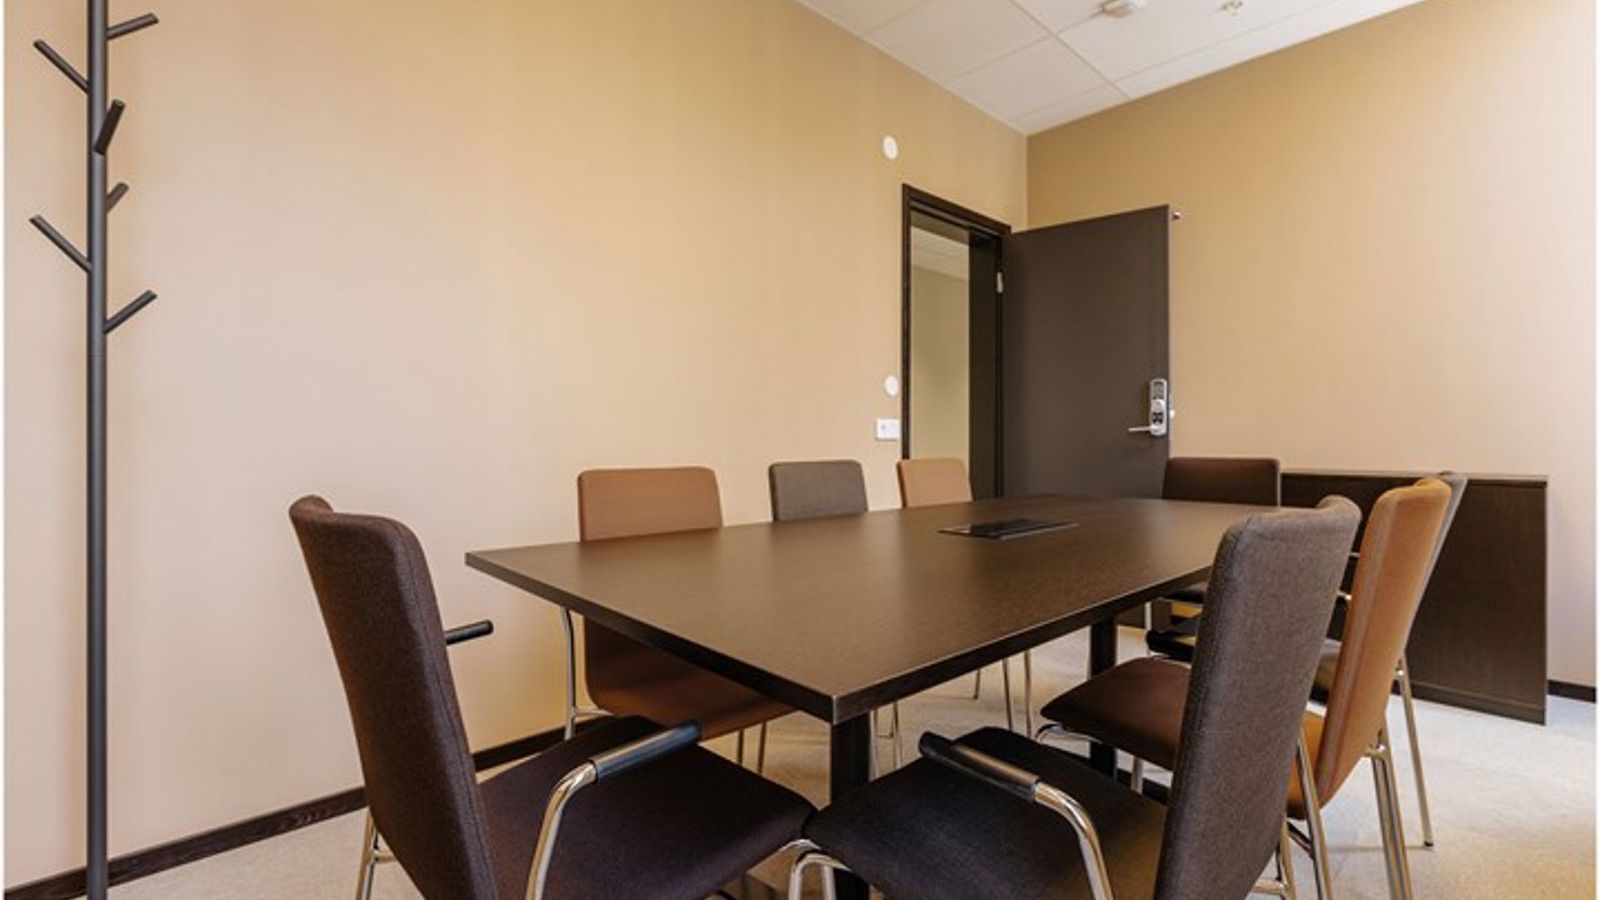 Conference room with brown tables and chairs in boardroom seating